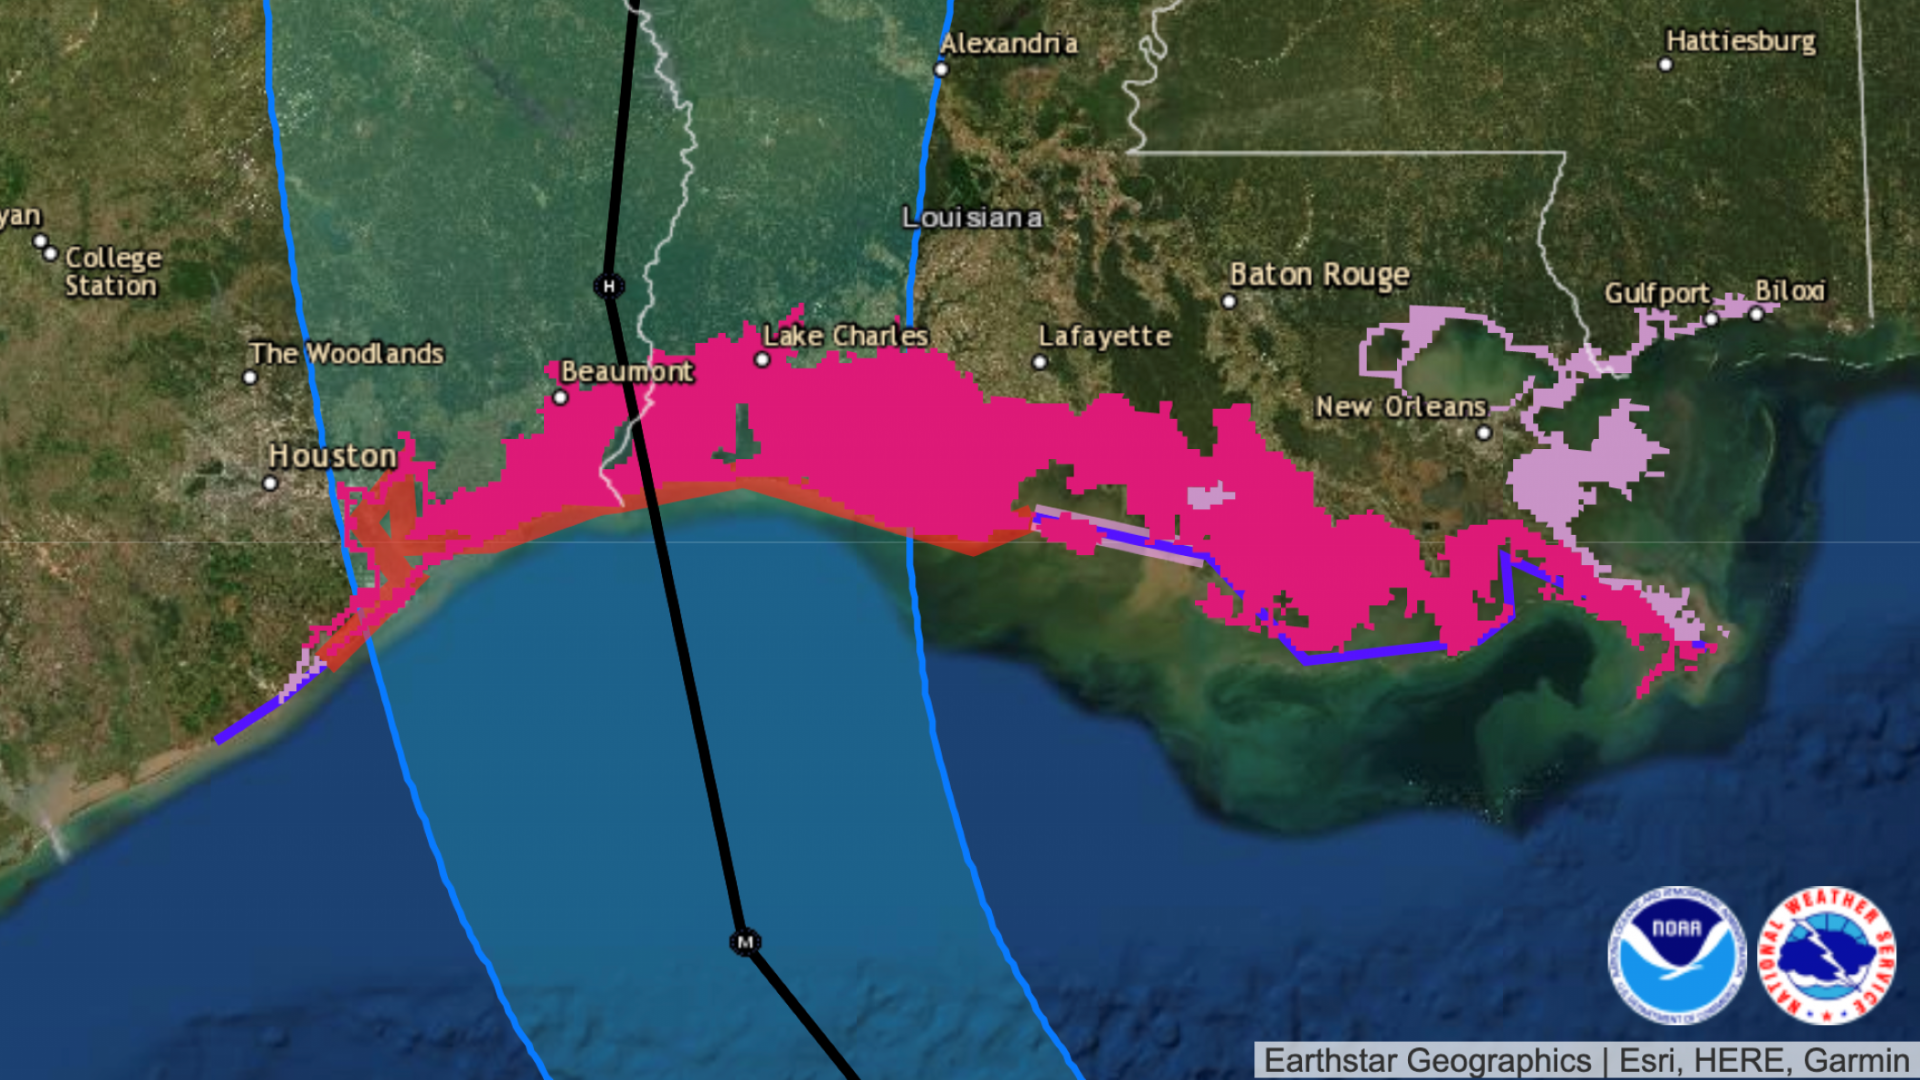 Hurricane Laura will bring a potentially perilous storm surge when it makes landfall — likely near the Texas-Louisiana border, forecasters say. In this graphic, the magenta and pink areas reflect storm surge alerts.